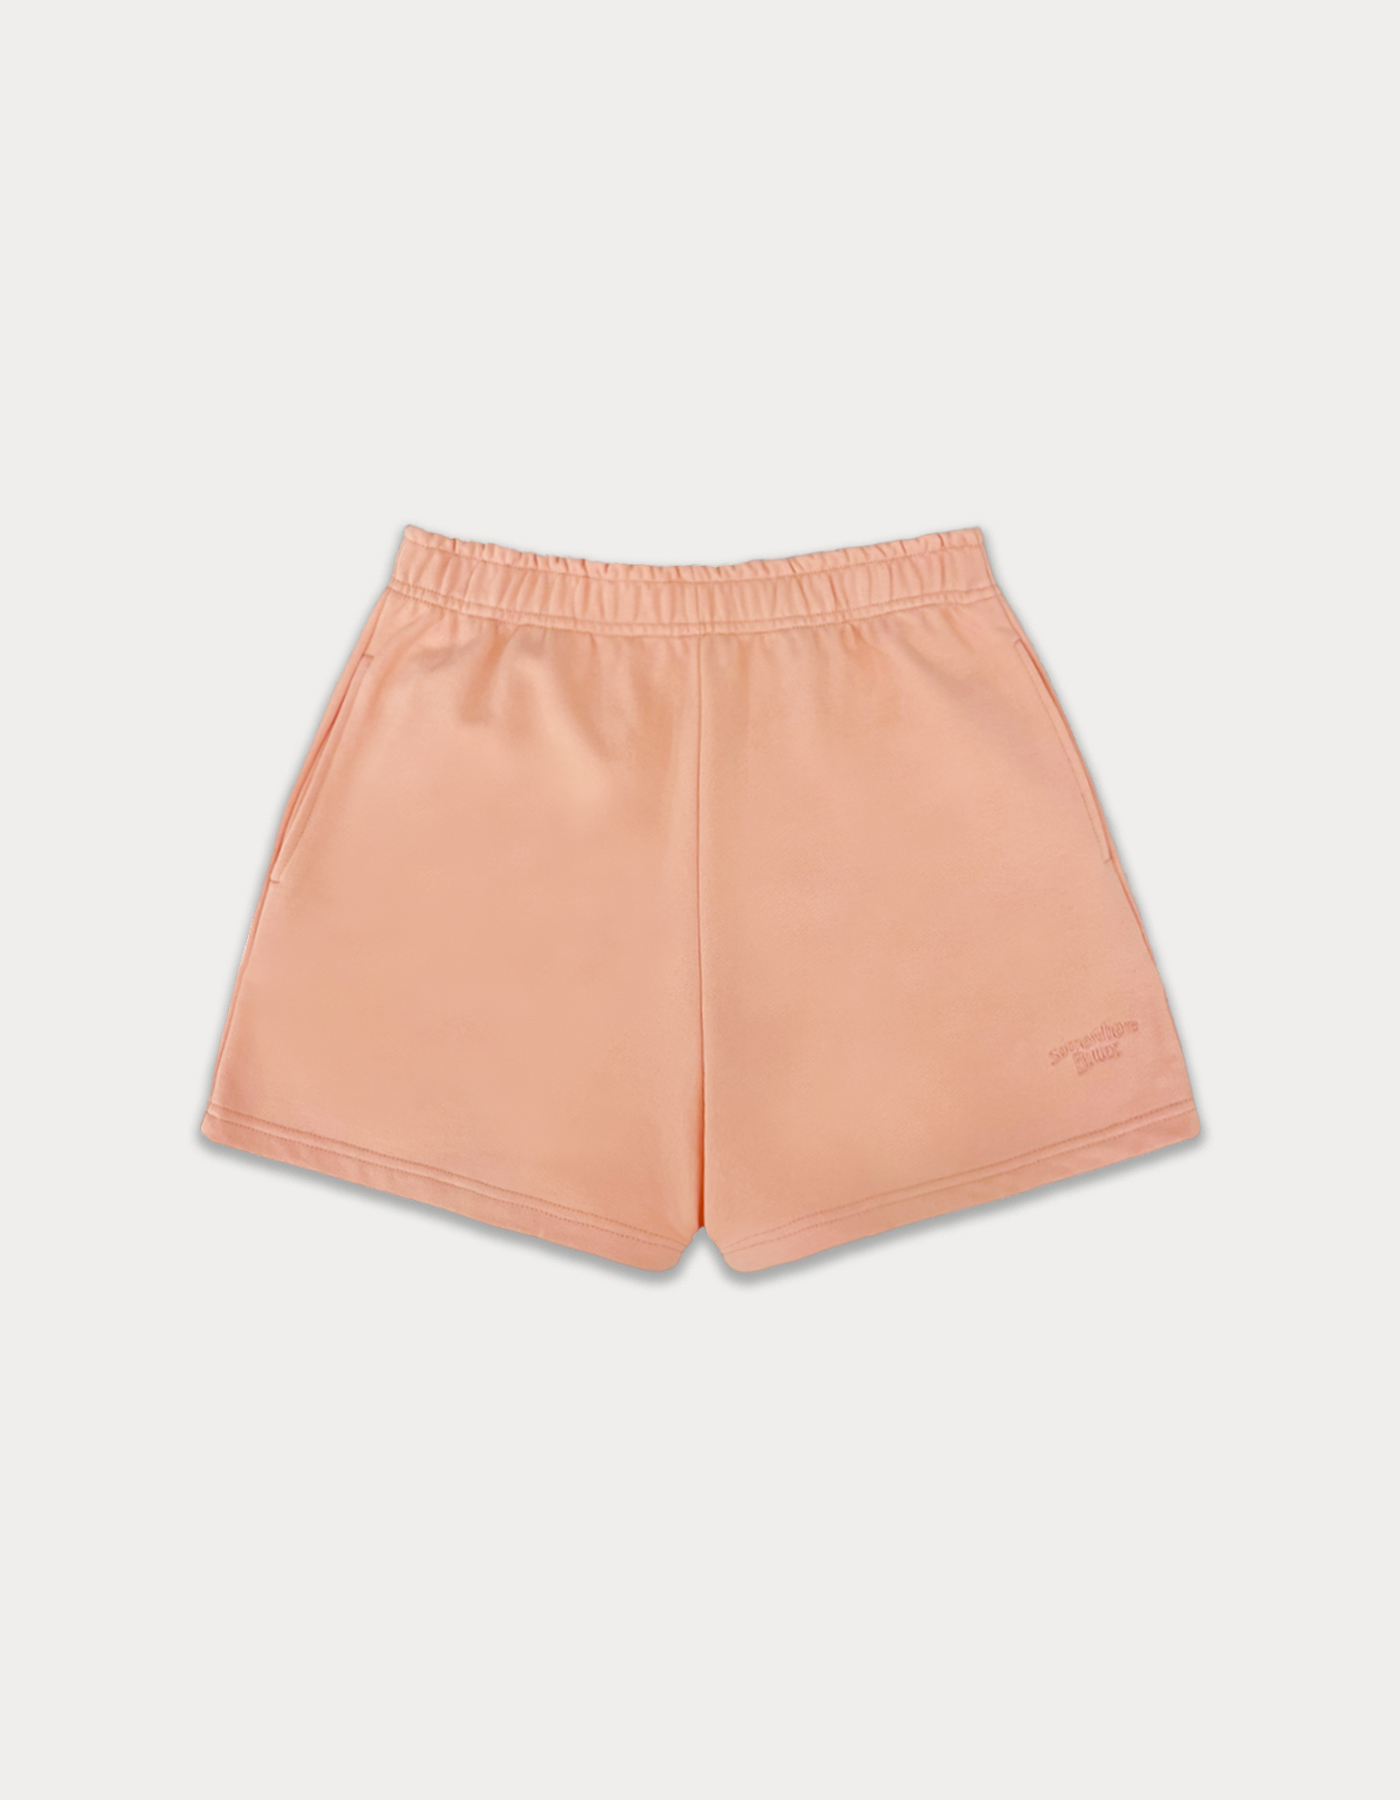 [3rd Order 6.4 출고] Essential sweat shorts - apricot